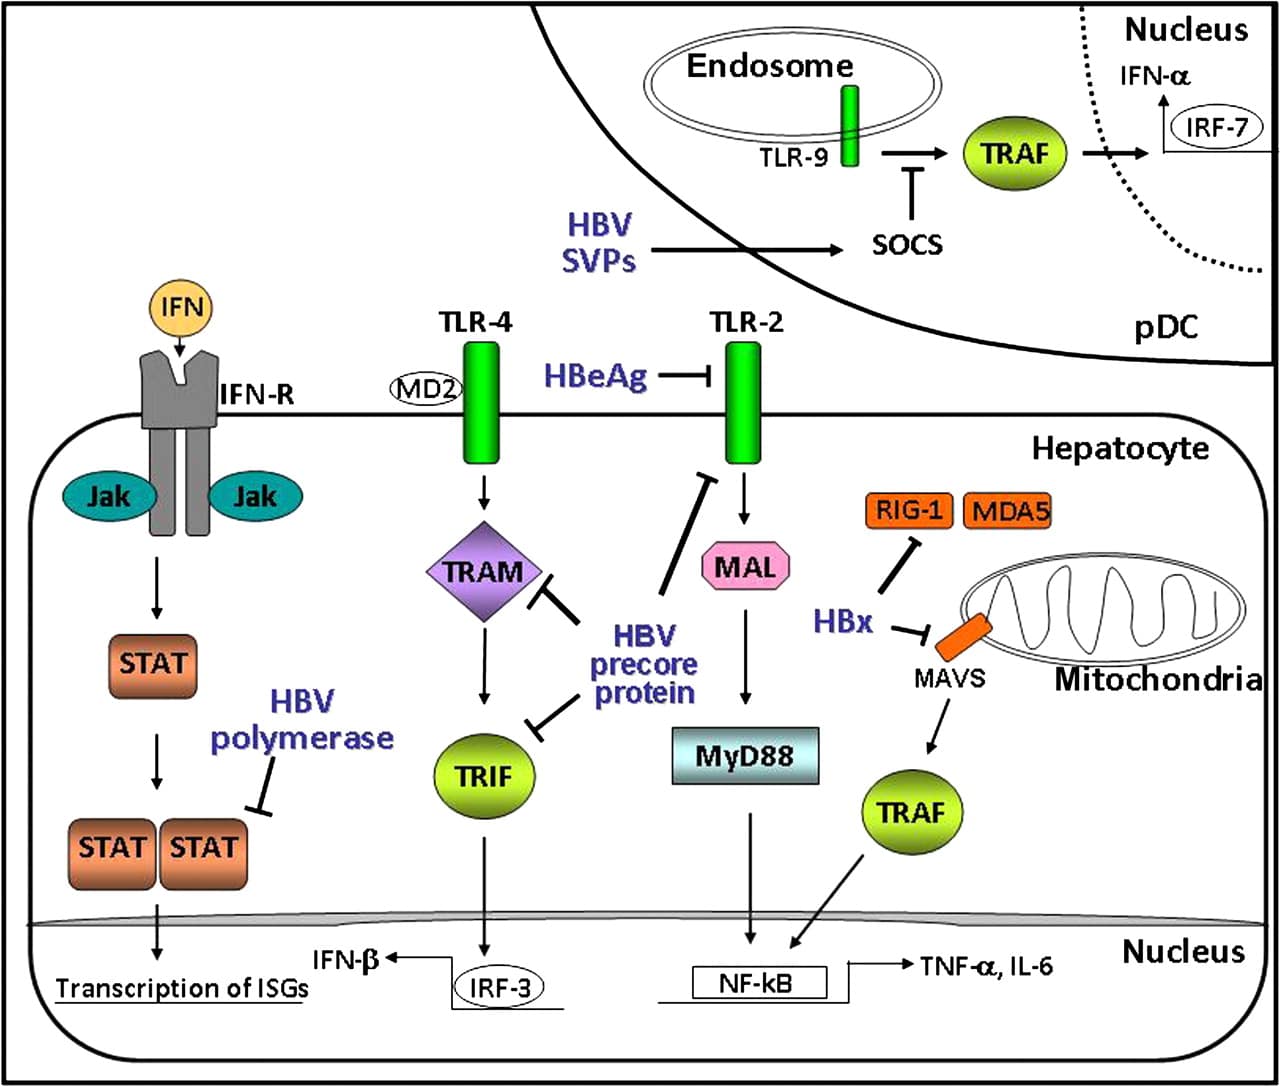 New insight in the pathobiology of hepatitis B virus infection